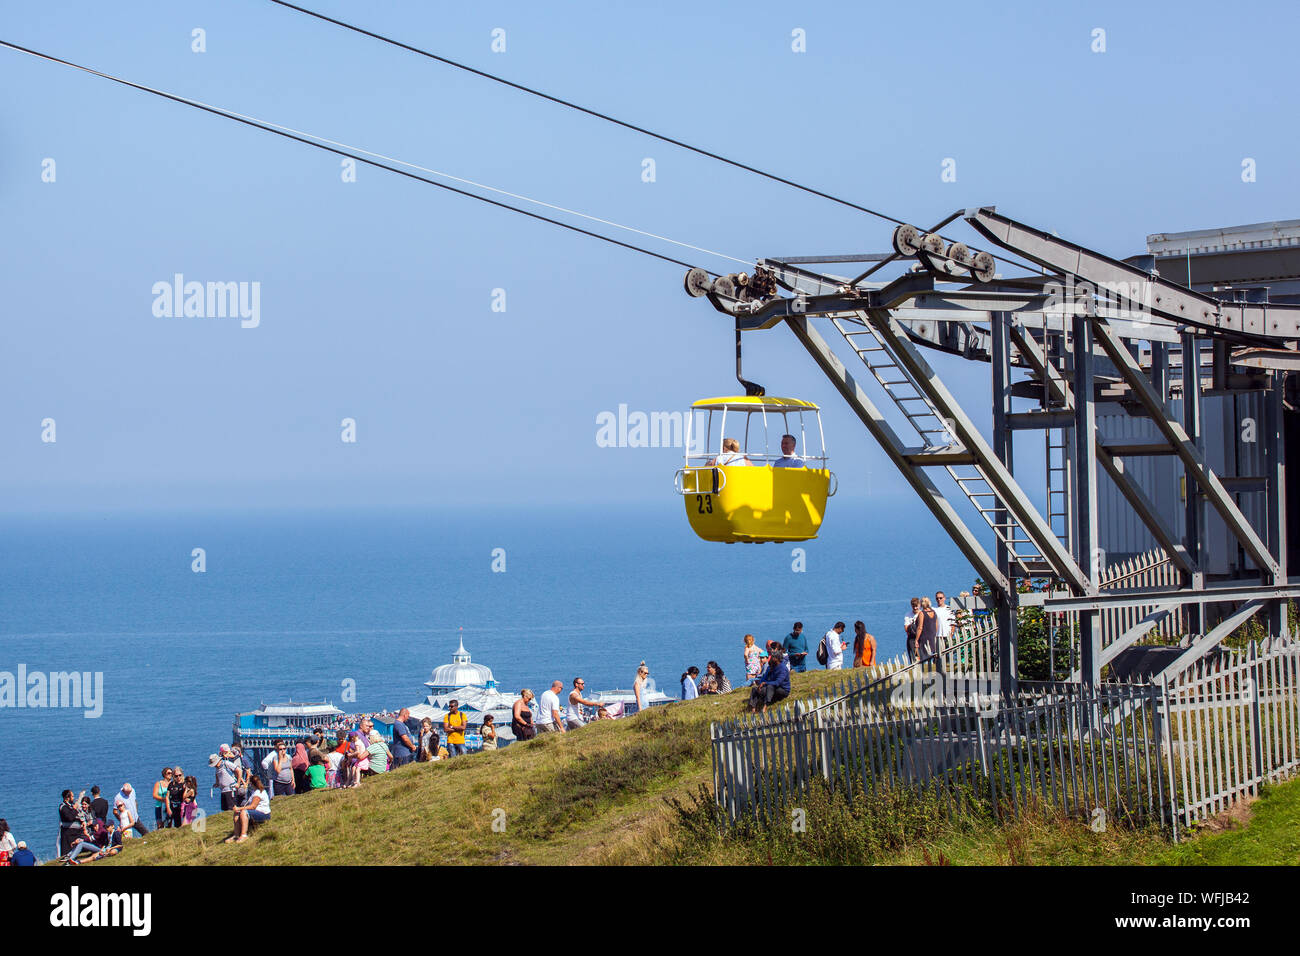 People tourists holidaymakers queuing for the cable car coming out of the cable car station at the seaside holiday resort of Llandudno North Wales Stock Photo